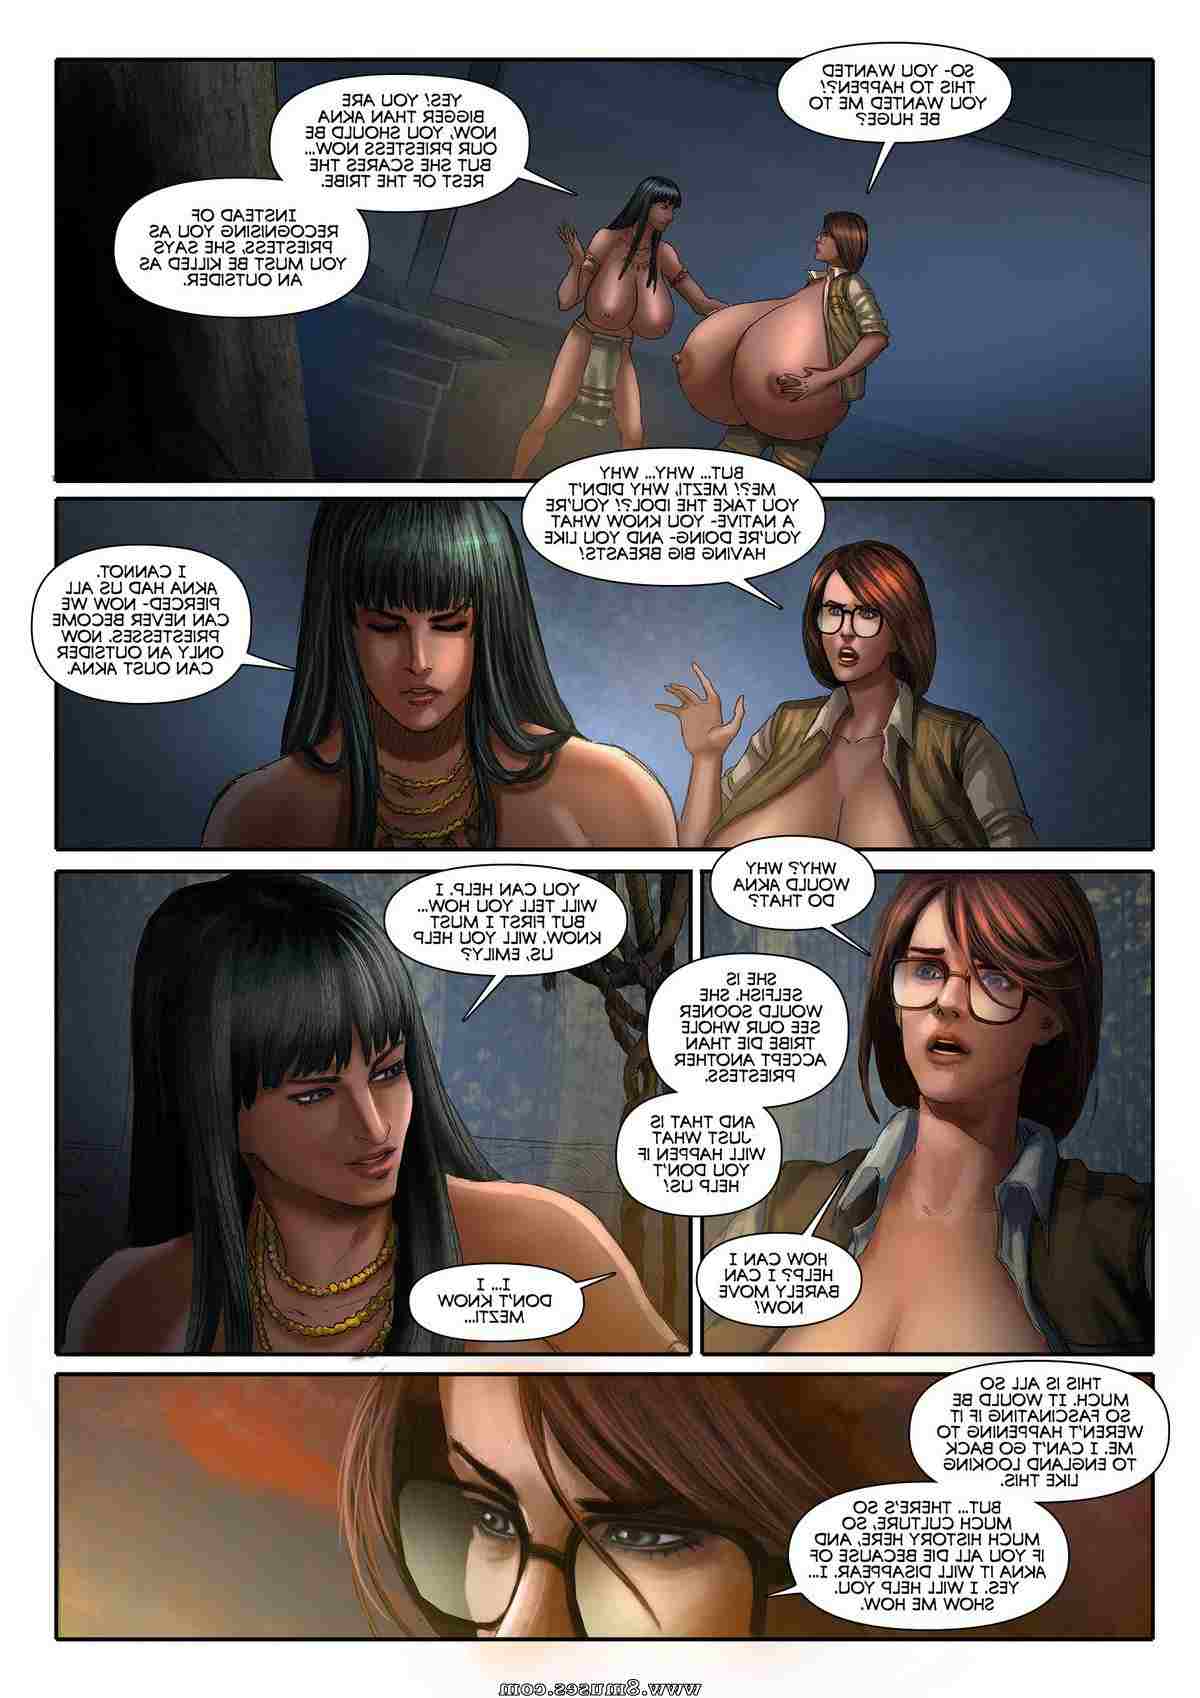 Expansionfan-Comics/Going-Native/Going-Native-02 Going_Native_02__8muses_-_Sex_and_Porn_Comics_5.jpg